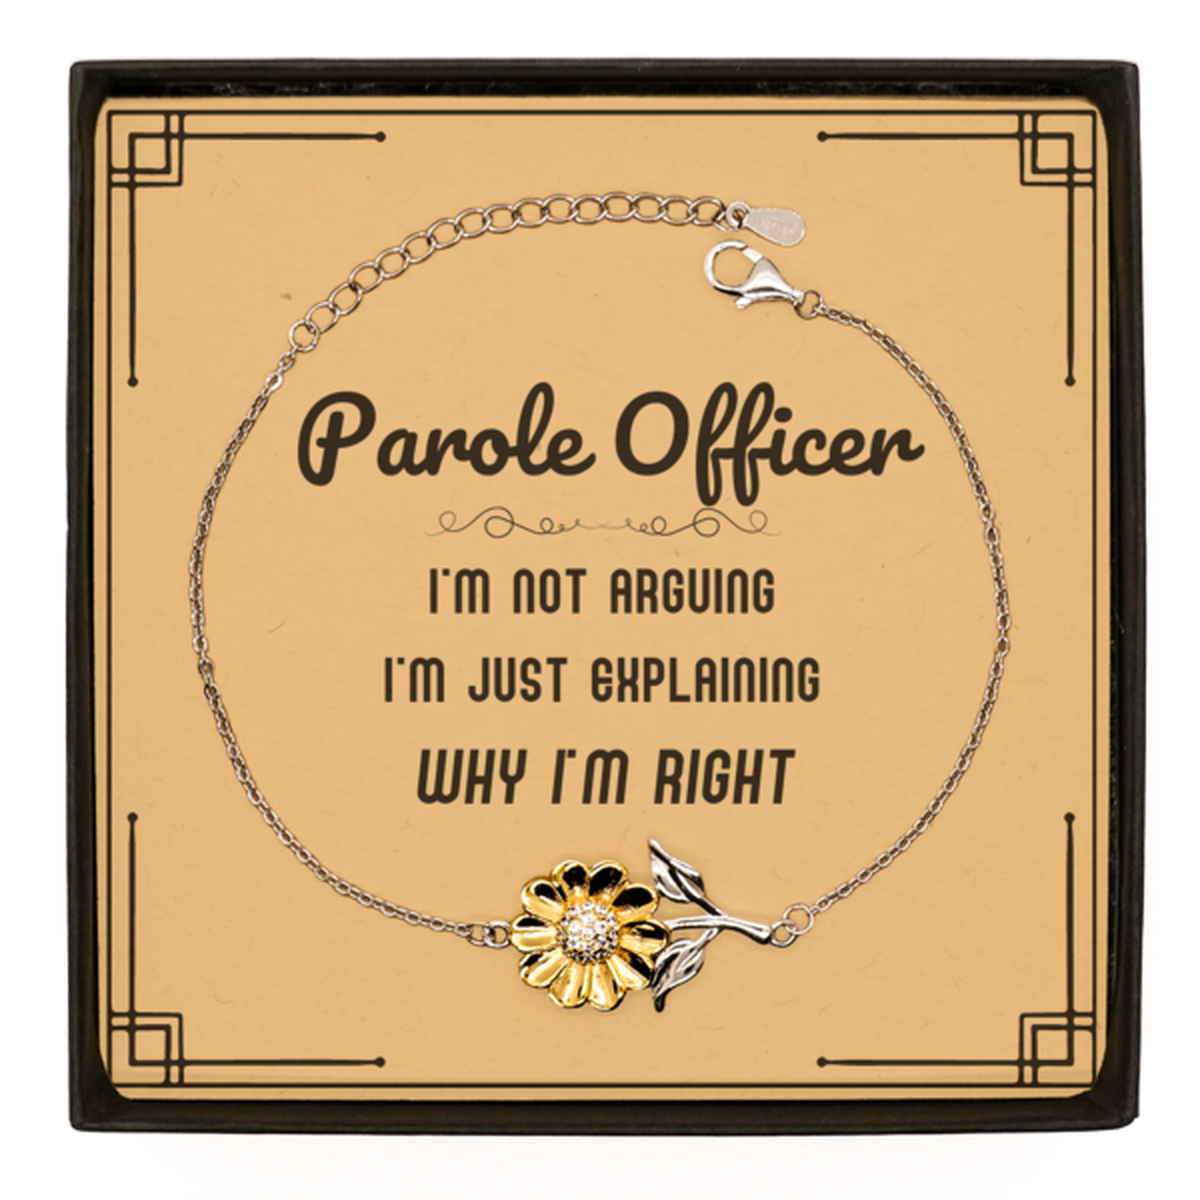 Parole Officer I'm not Arguing. I'm Just Explaining Why I'm RIGHT Sunflower Bracelet, Funny Saying Quote Parole Officer Gifts For Parole Officer Message Card Graduation Birthday Christmas Gifts for Men Women Coworker